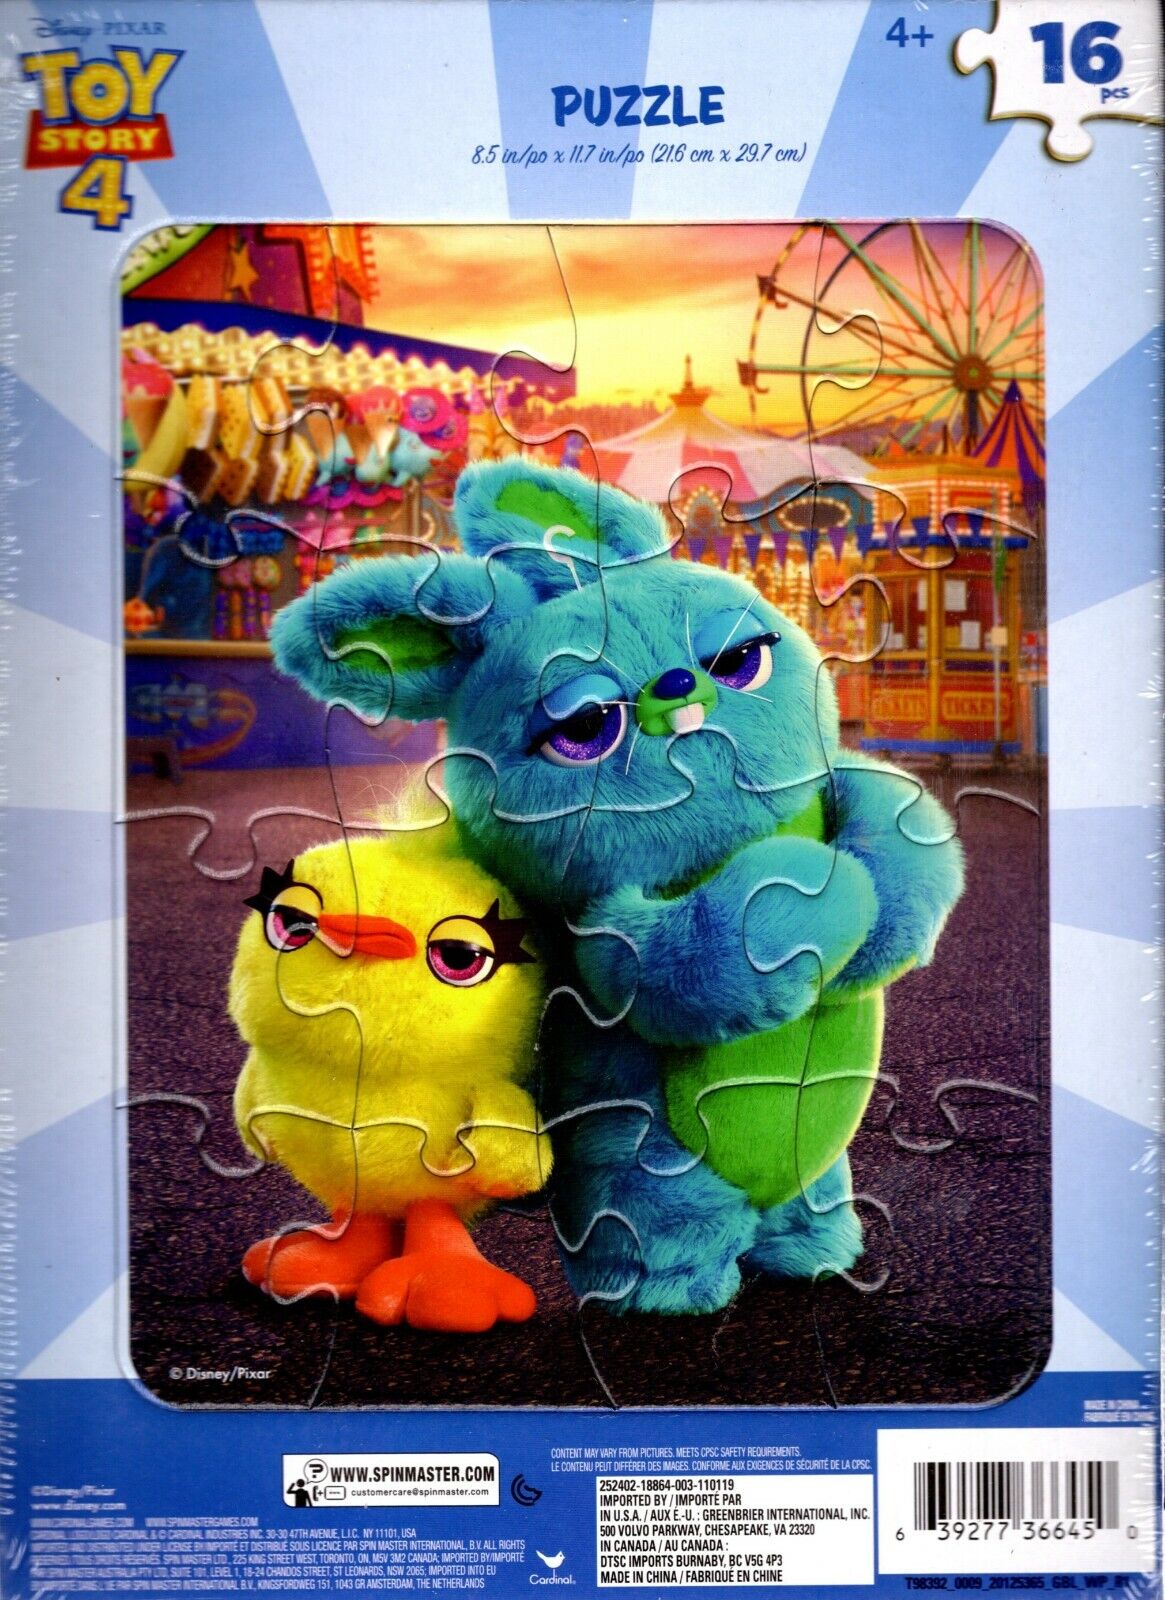 Toy Story 4 - 16 Pieces Jigsaw Puzzle (set of 2)